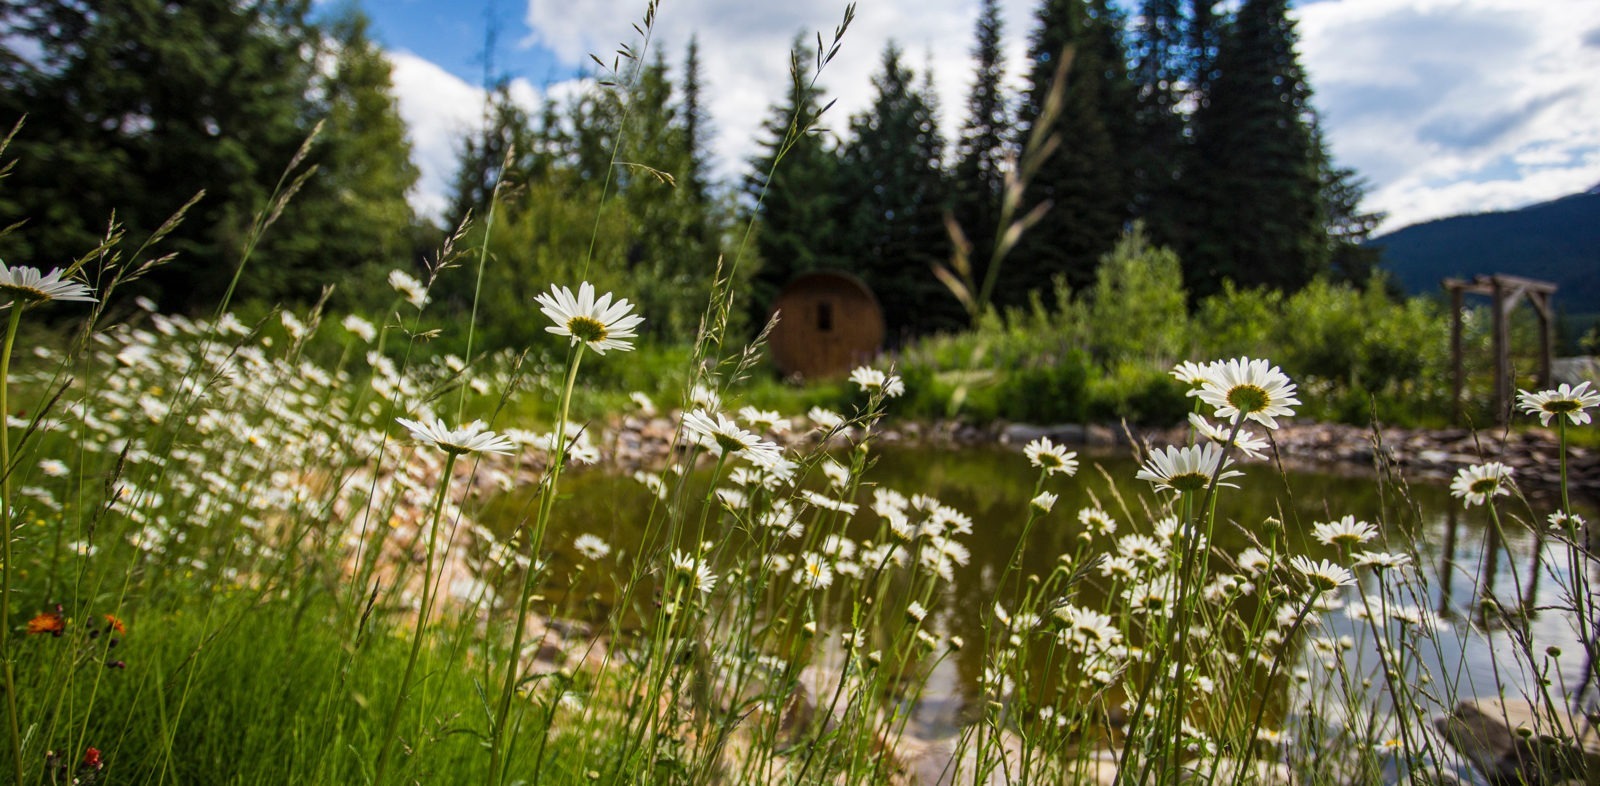 White daisies near water with cabin in background amongst the woods